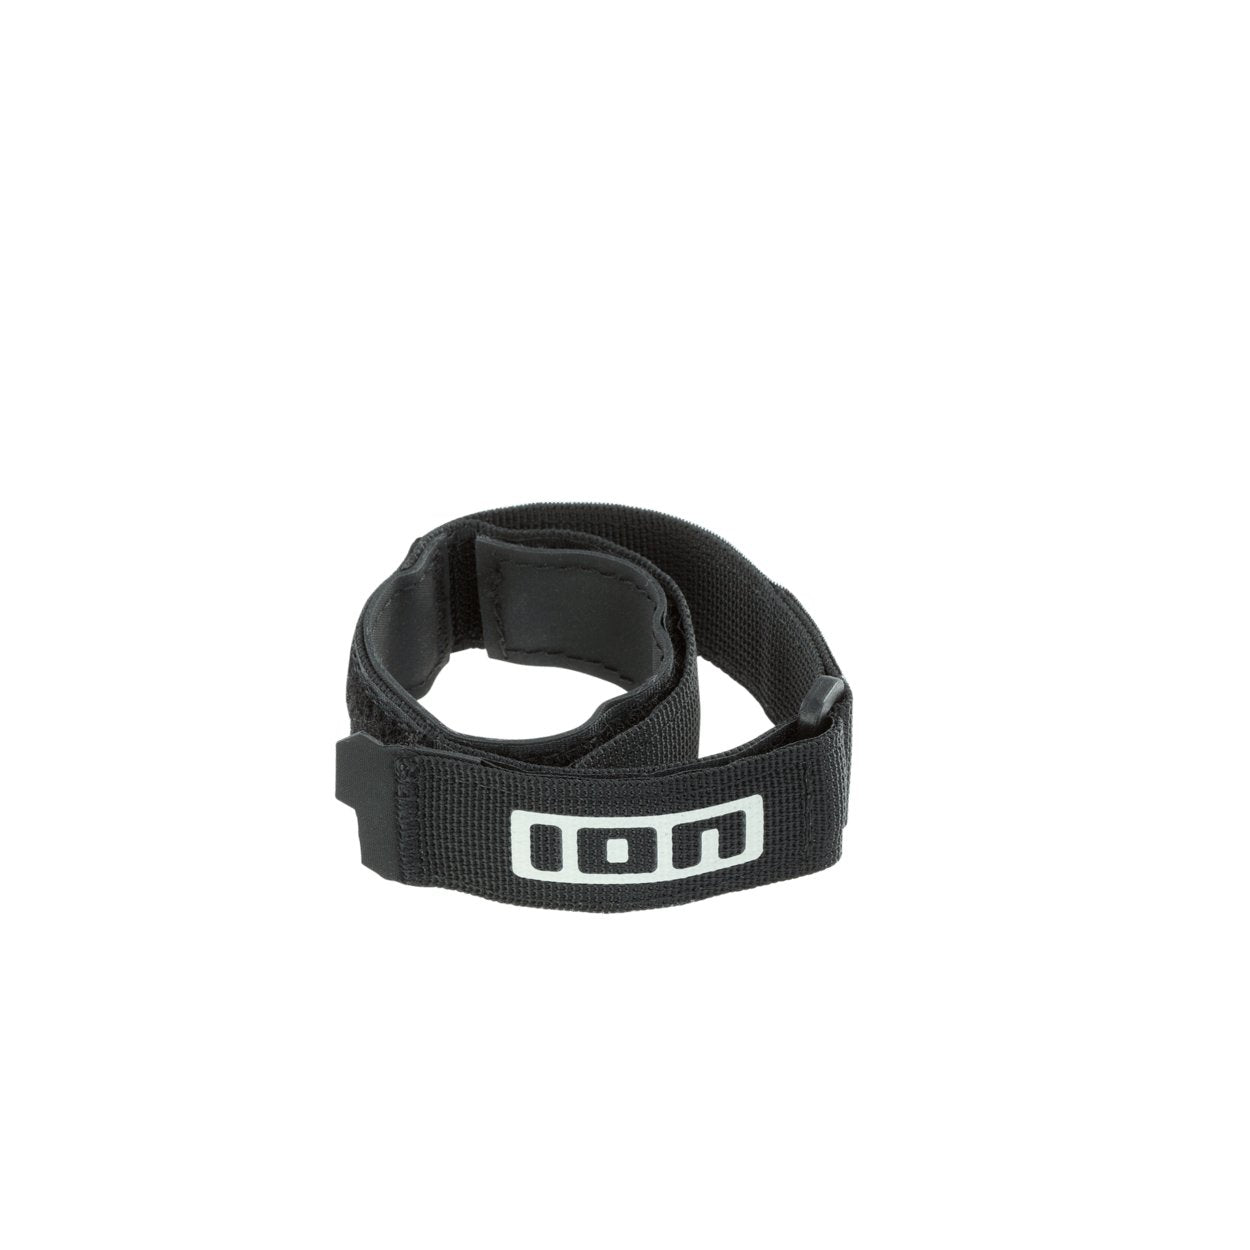 ION Fix Strap S 2024 - Worthing Watersports - 9008415980727 - Accessories - ION Bike